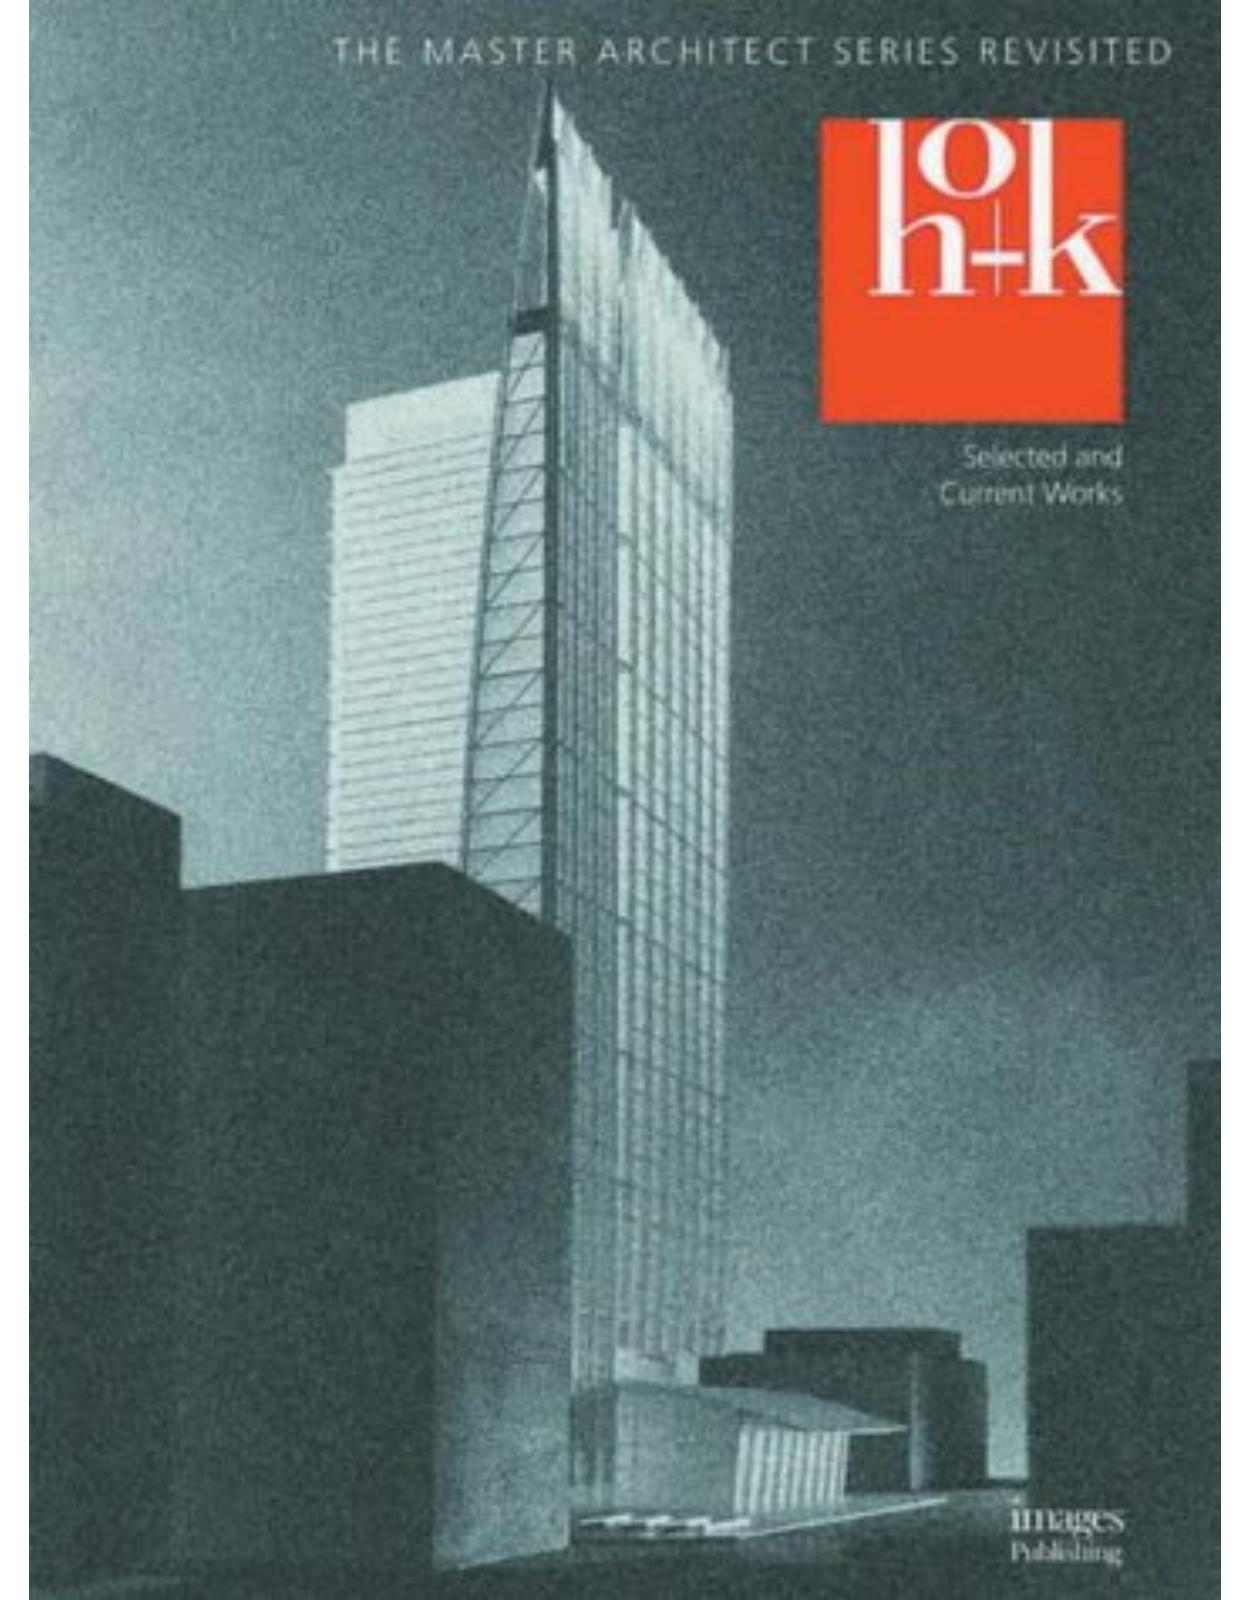 HOK Revisted: Selected and Current Works (Master Architect Series Revisited)